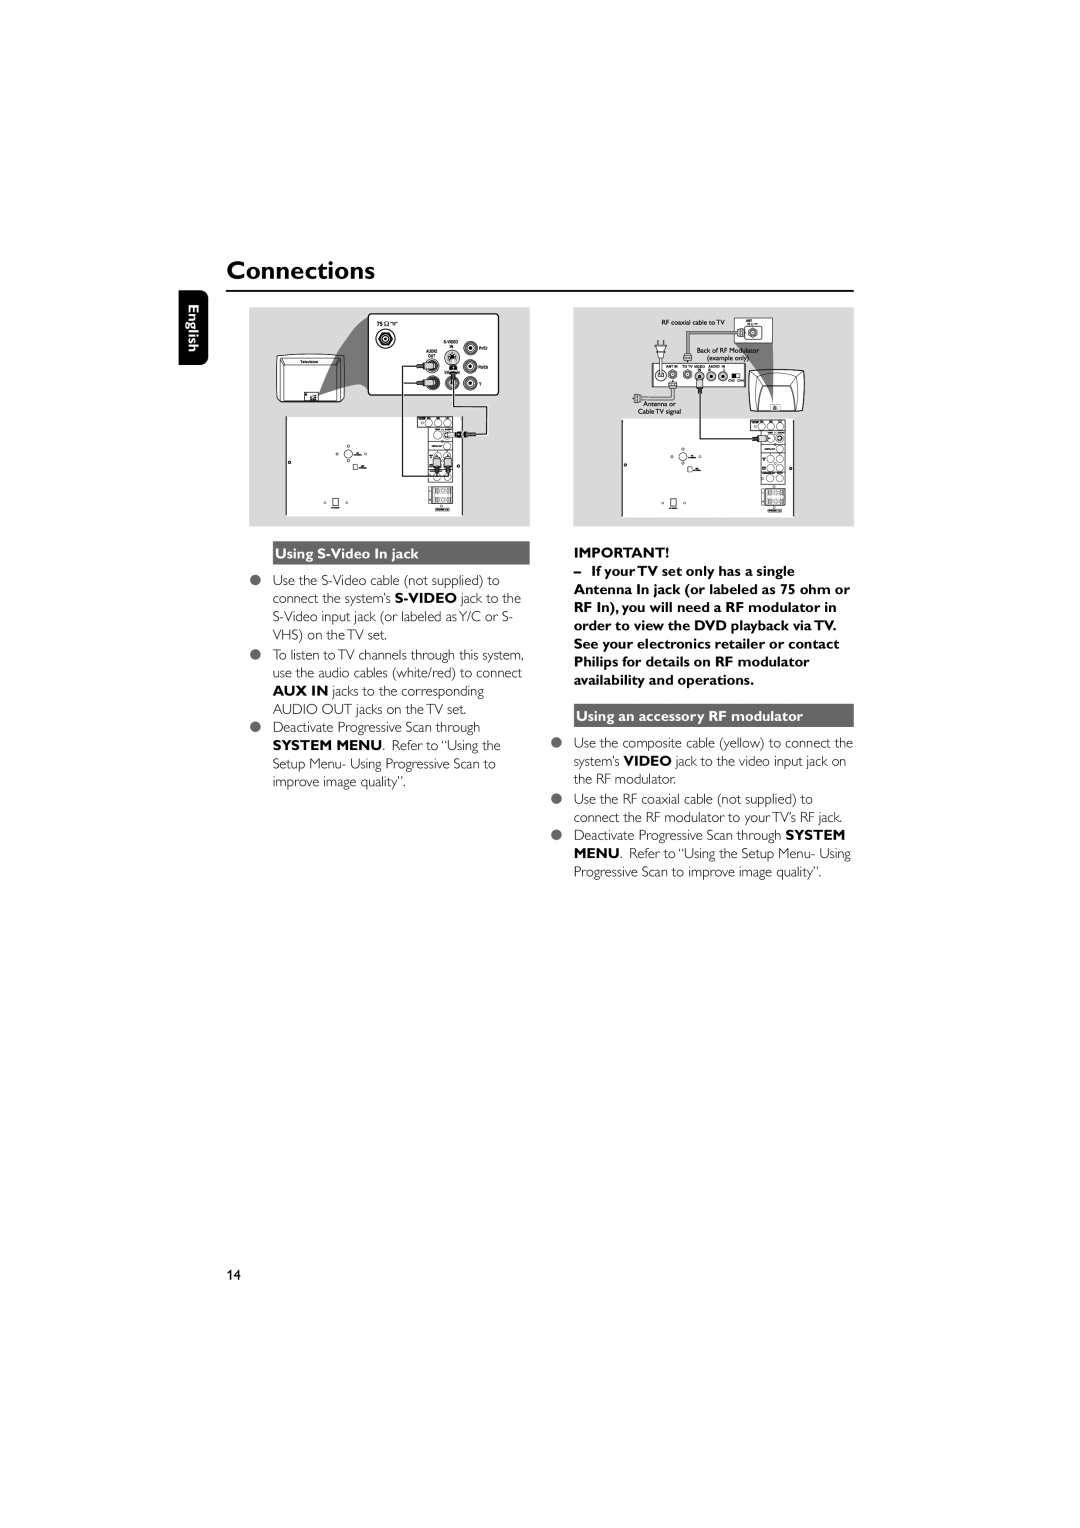 Philips FWD798/37B owner manual Connections, English, Using S-VideoIn jack, Using an accessory RF modulator 